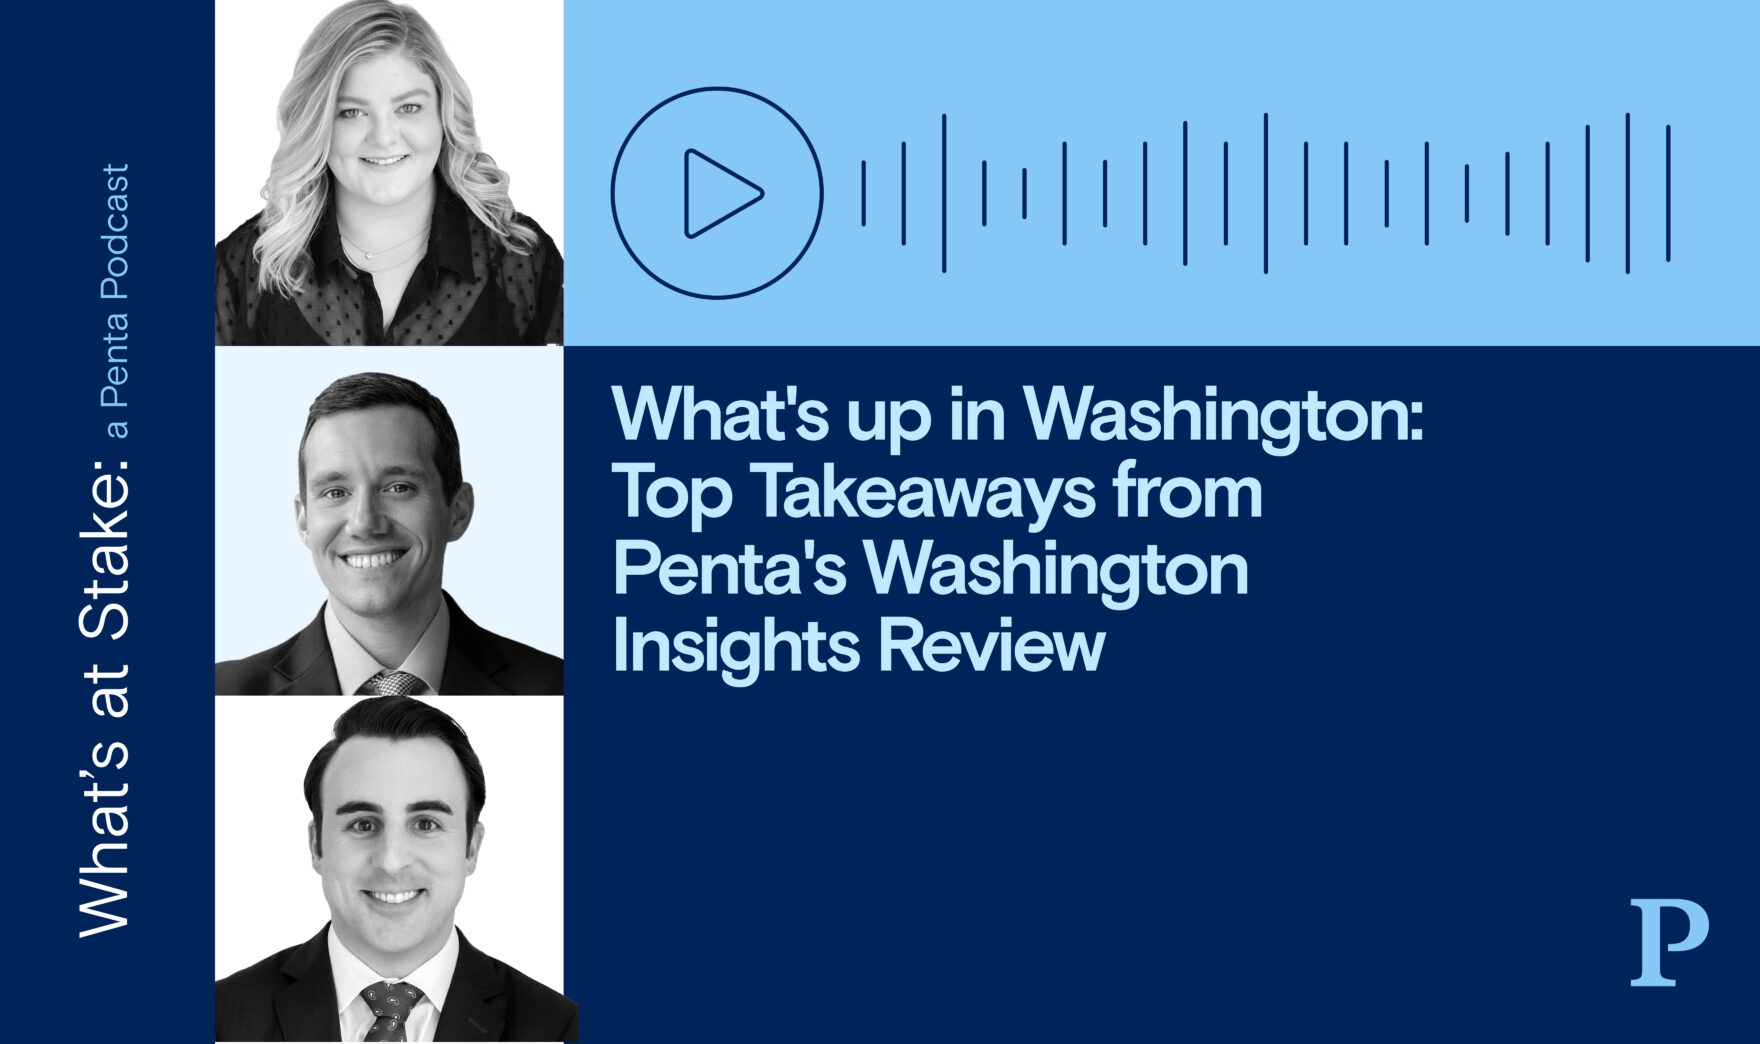 What’s up in Washington: Top Takeaways from Penta’s Washington Insights Review